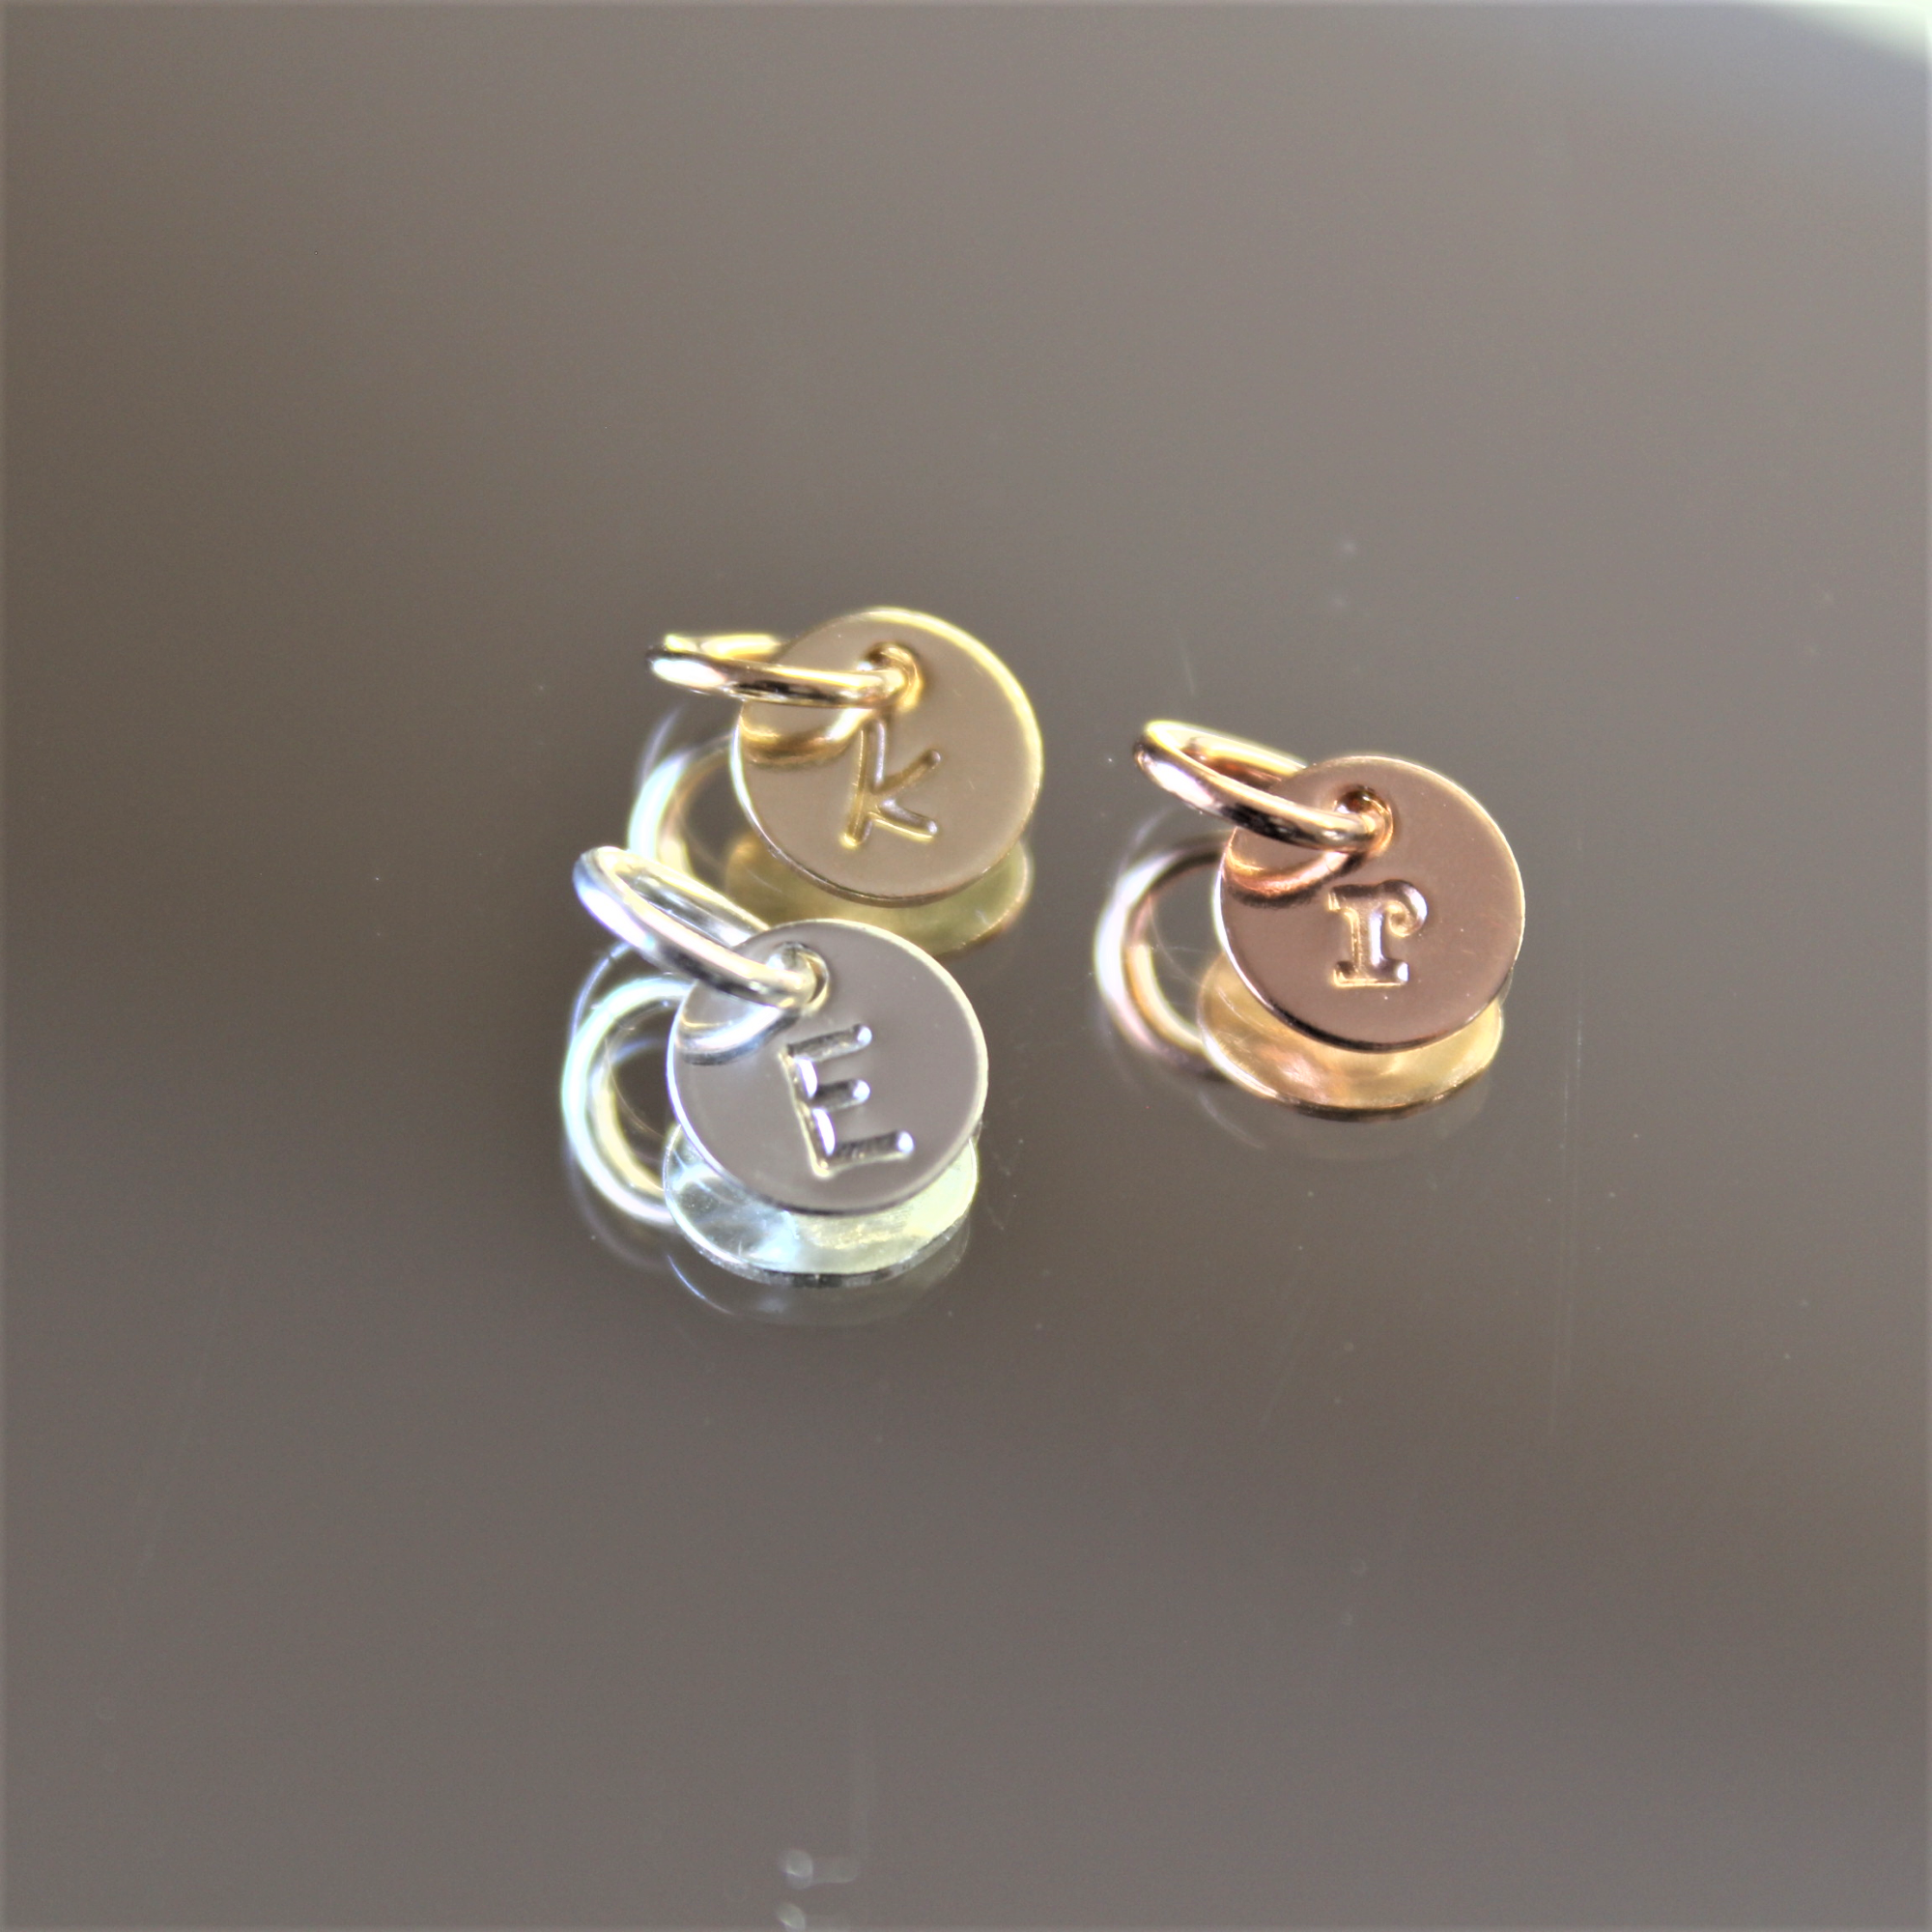 Tiny round initial charm - 1/4" (6.4mm)